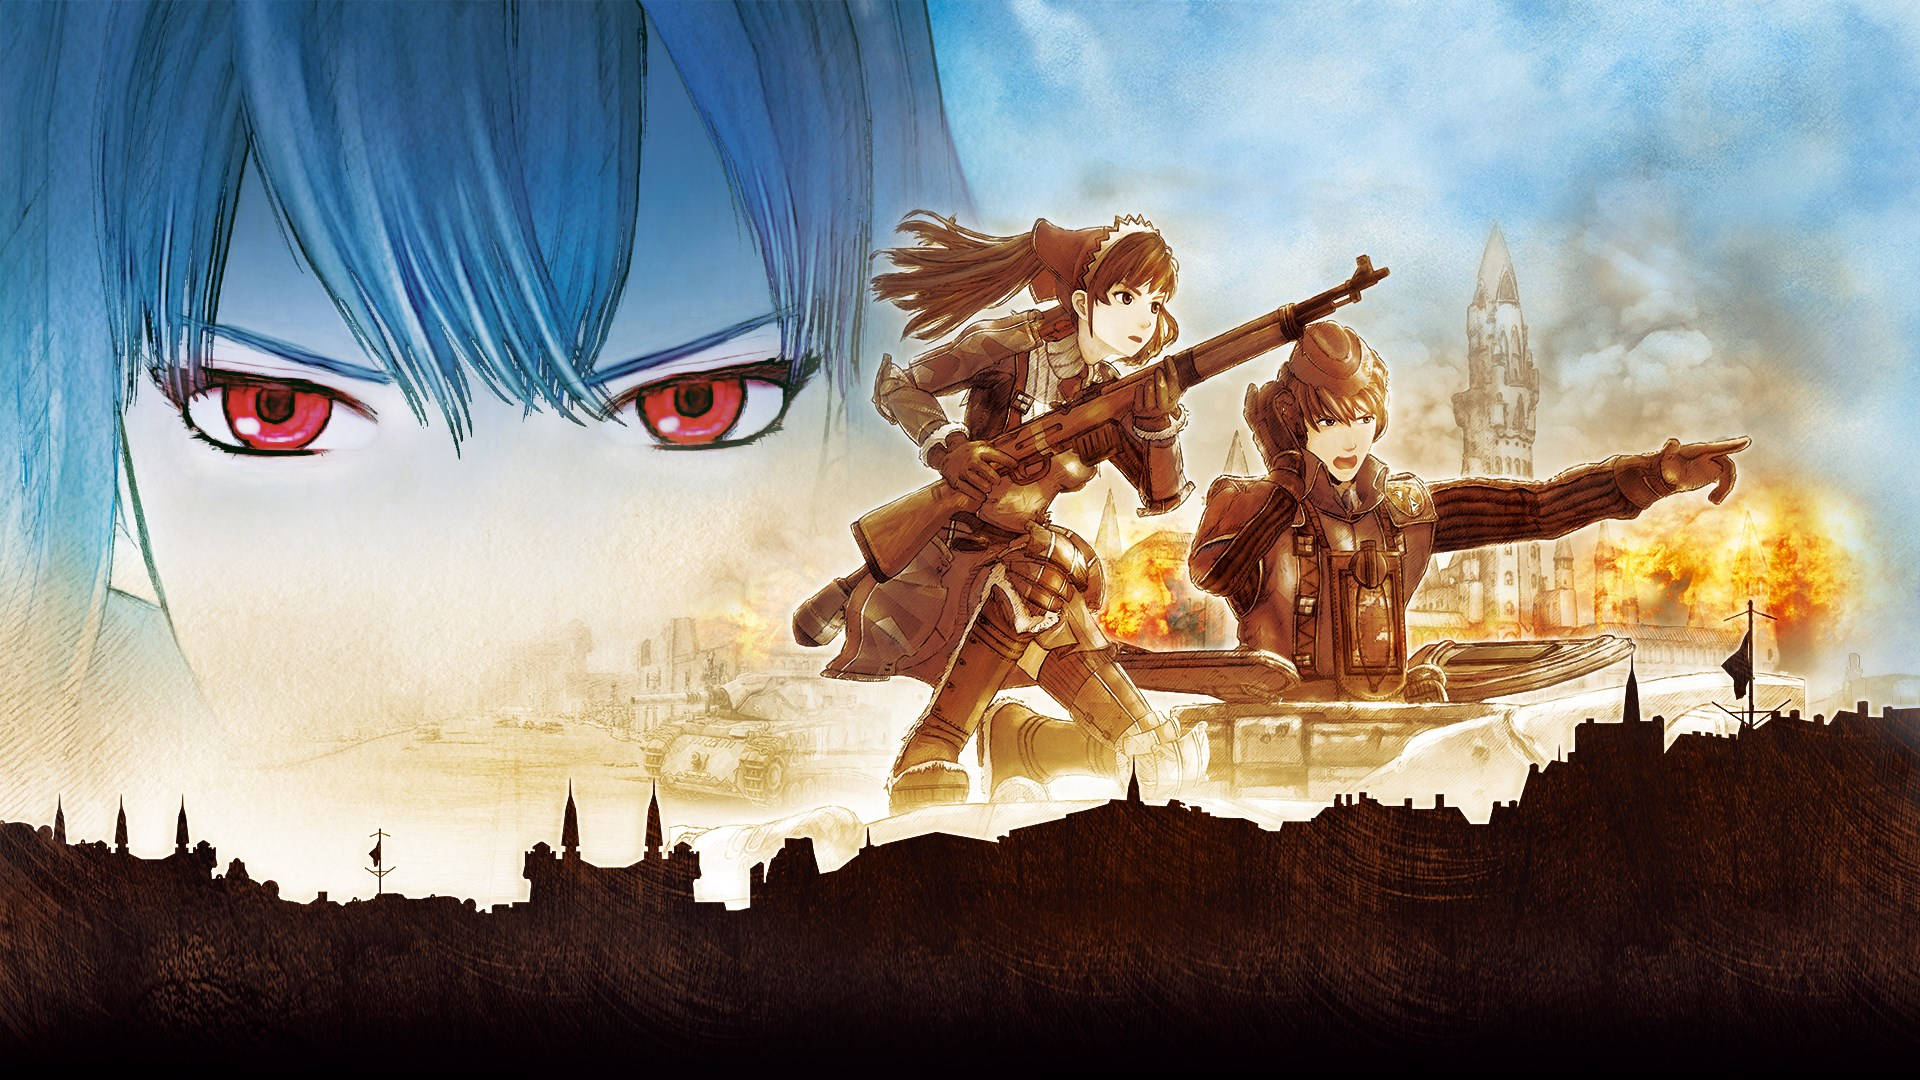 Valkyria Chronicles Poster